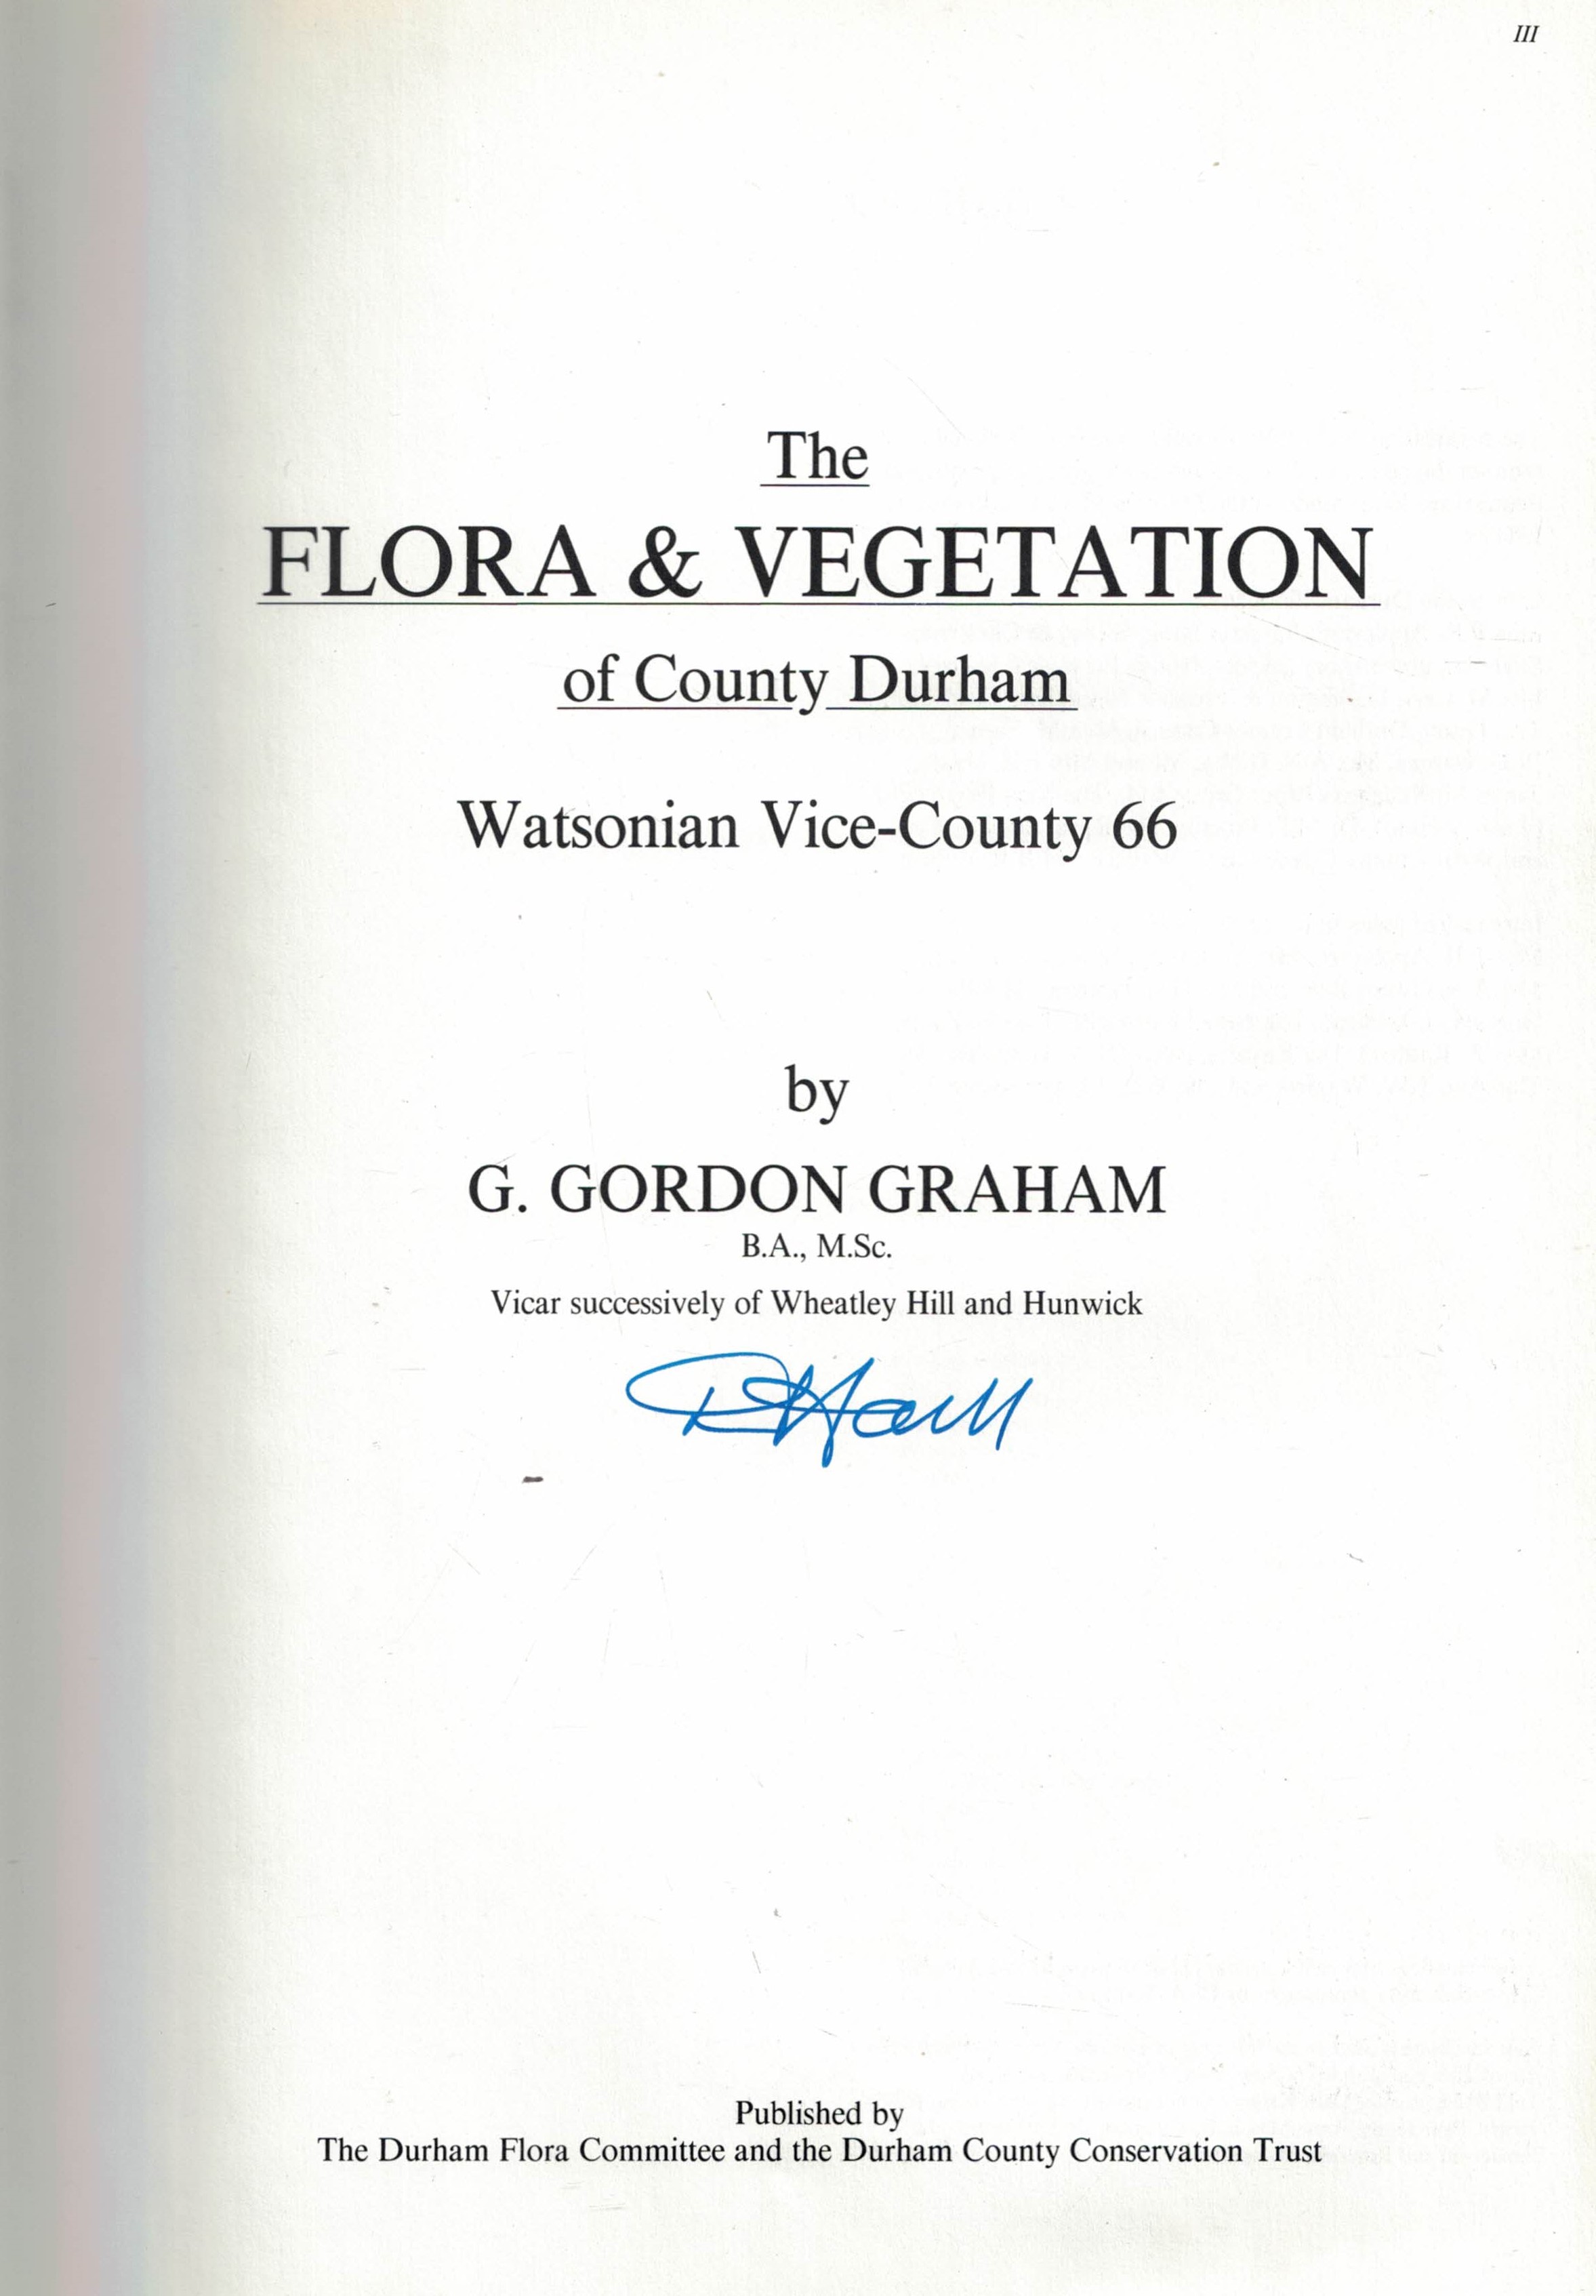 The Flora and Vegetation of County Durham. Signed copy.